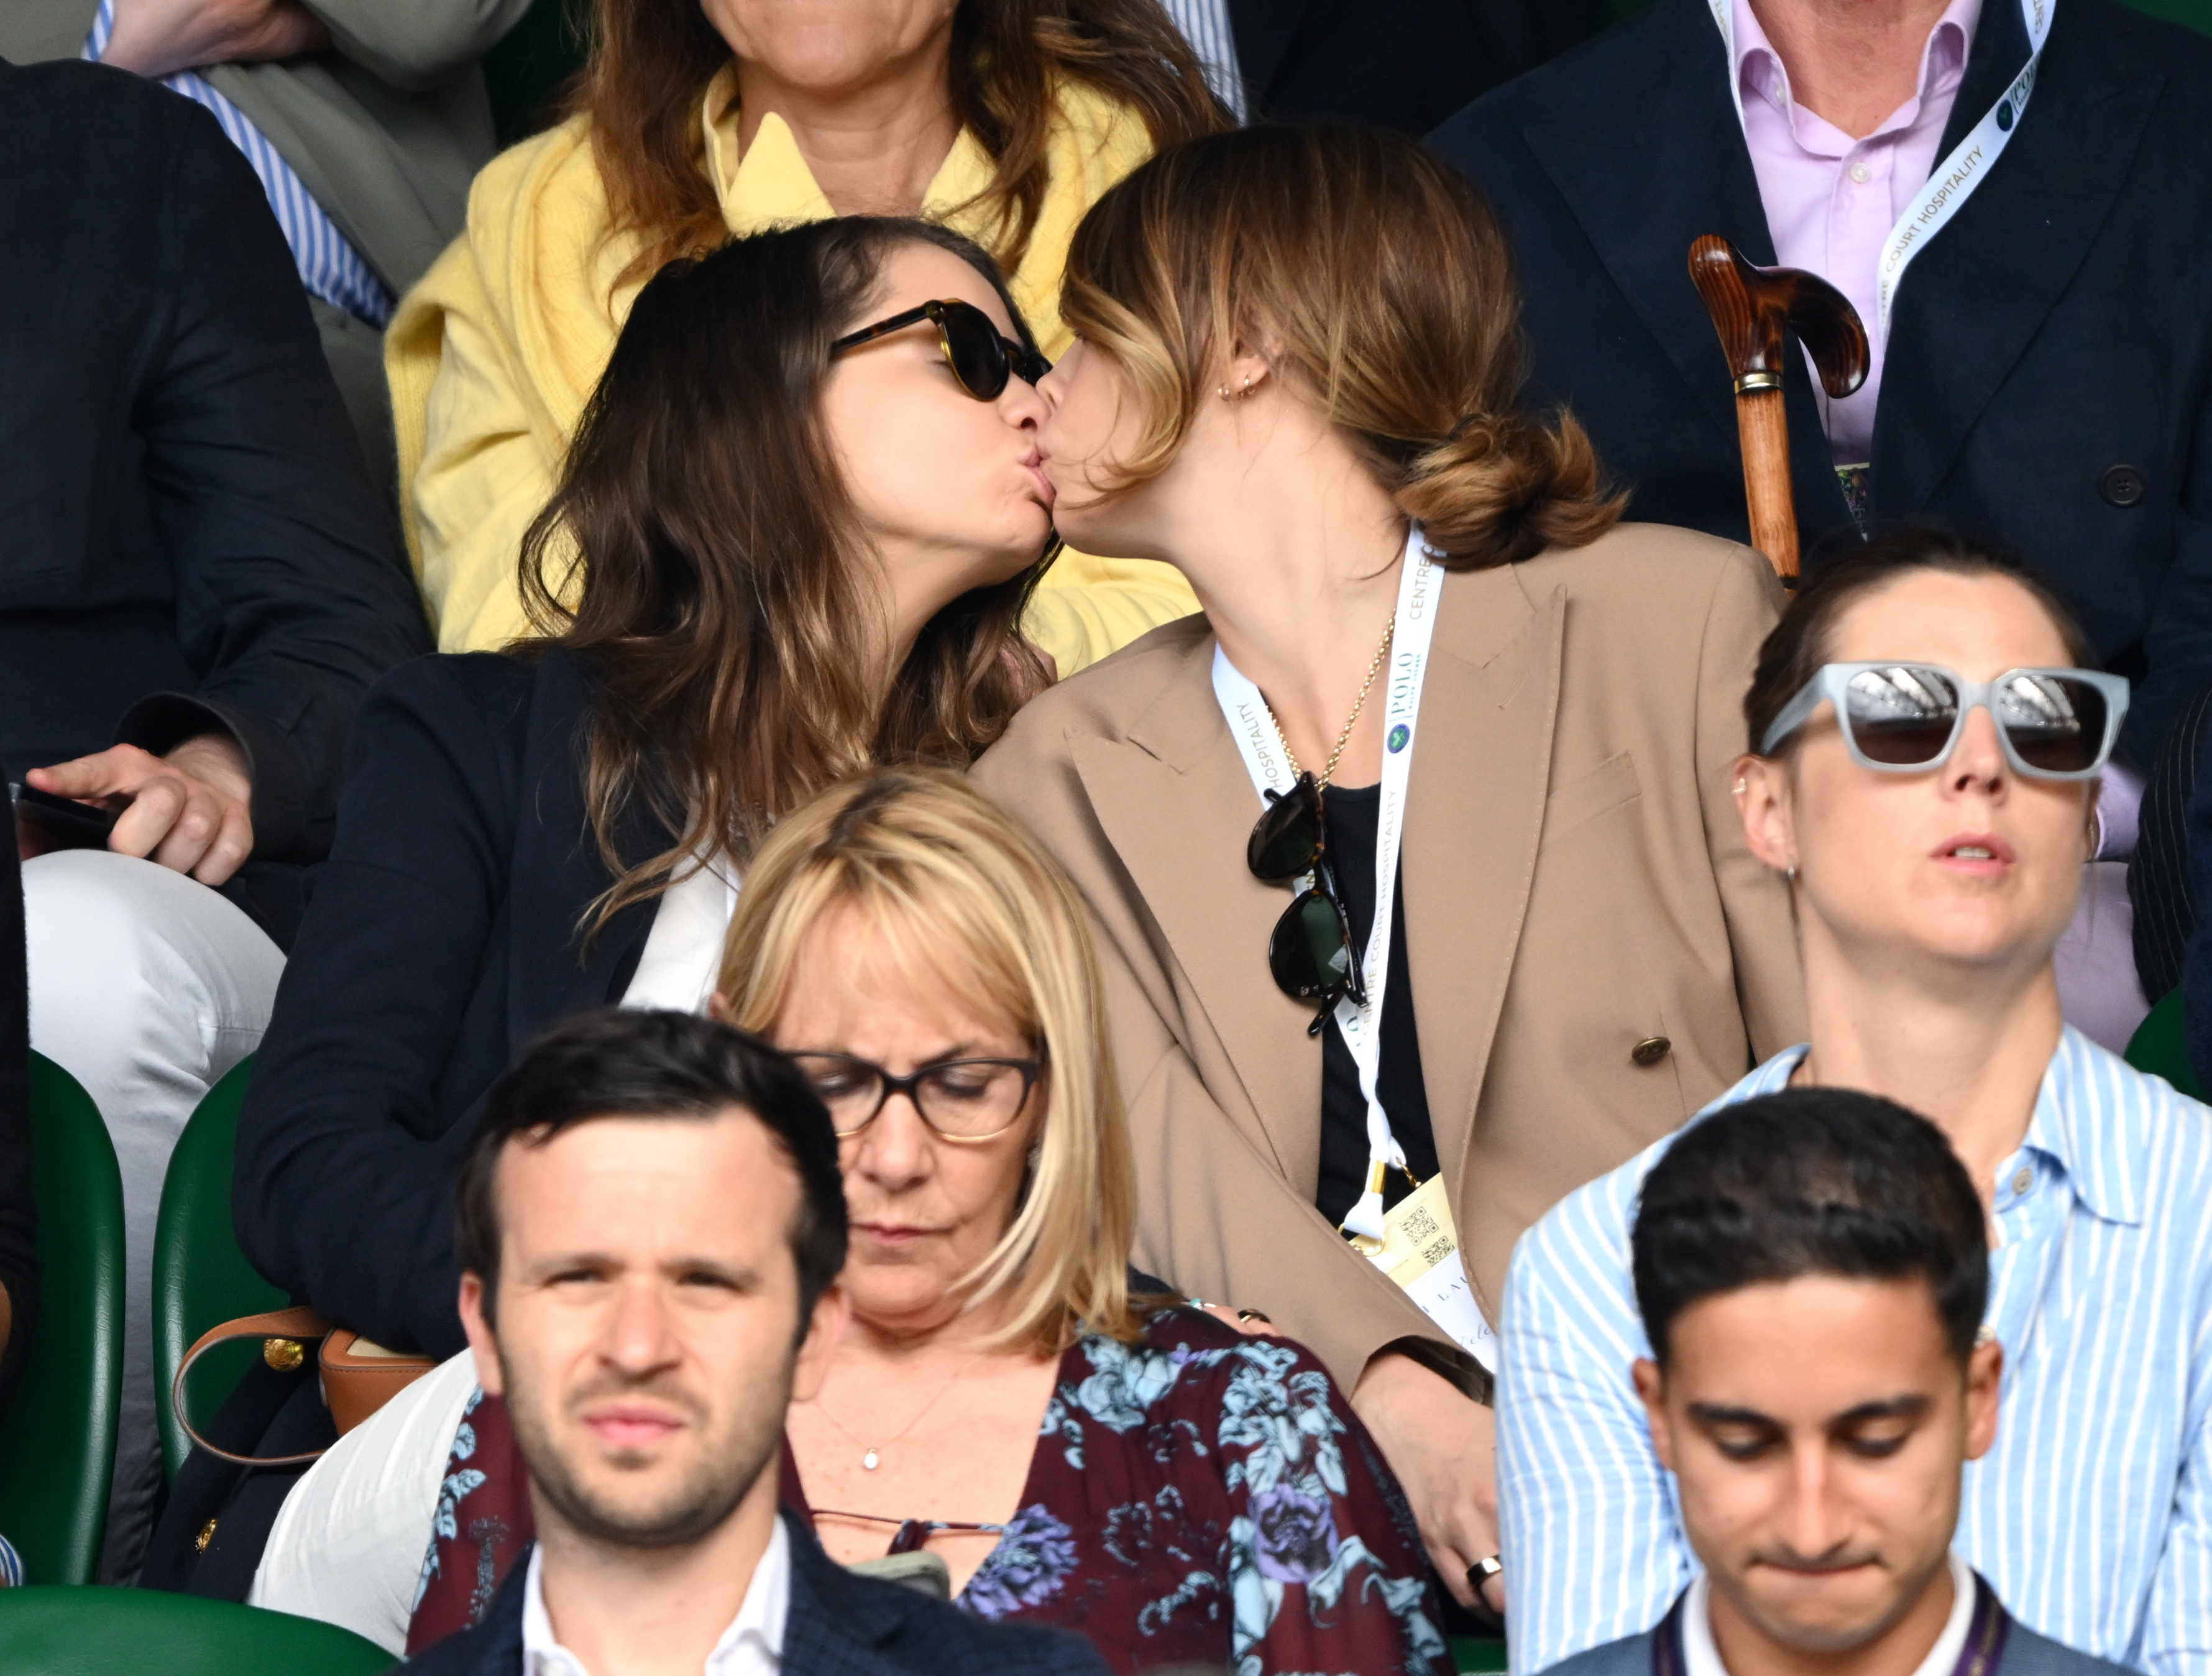 Minke and Cara Delevingne kissing in a crowd